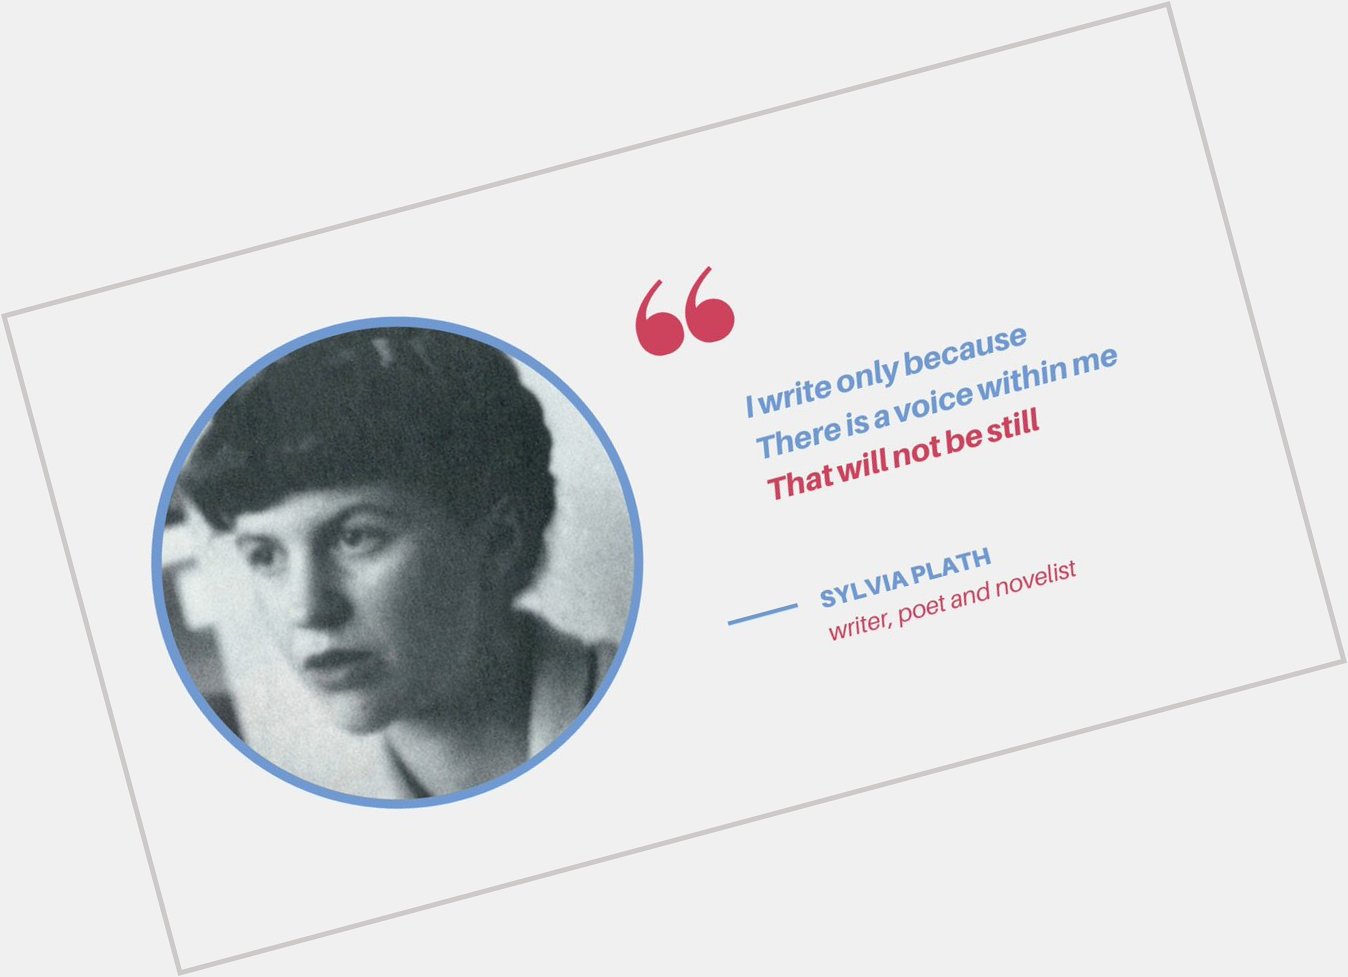 Happy author birthday to Sylvia Plath! What inspires you to keep writing? 